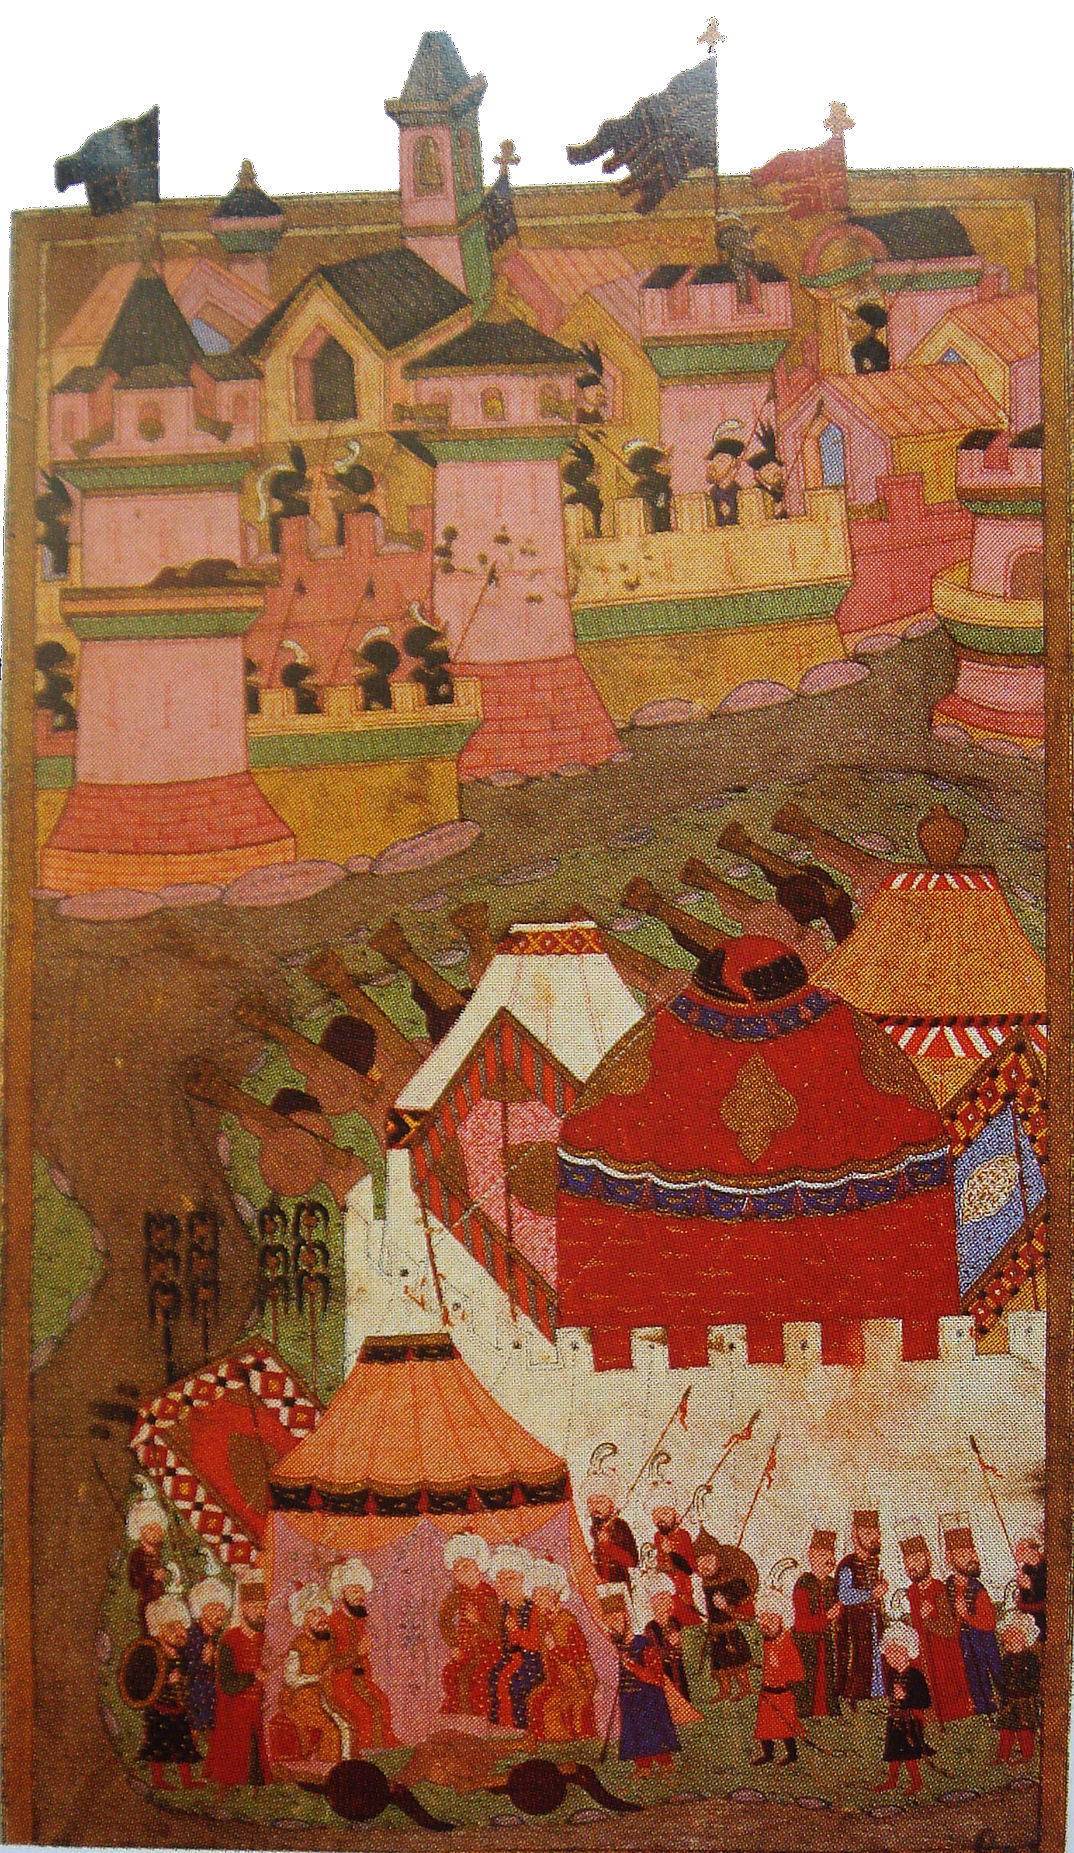 Siege of Vienna by Ottoman forces in 1529